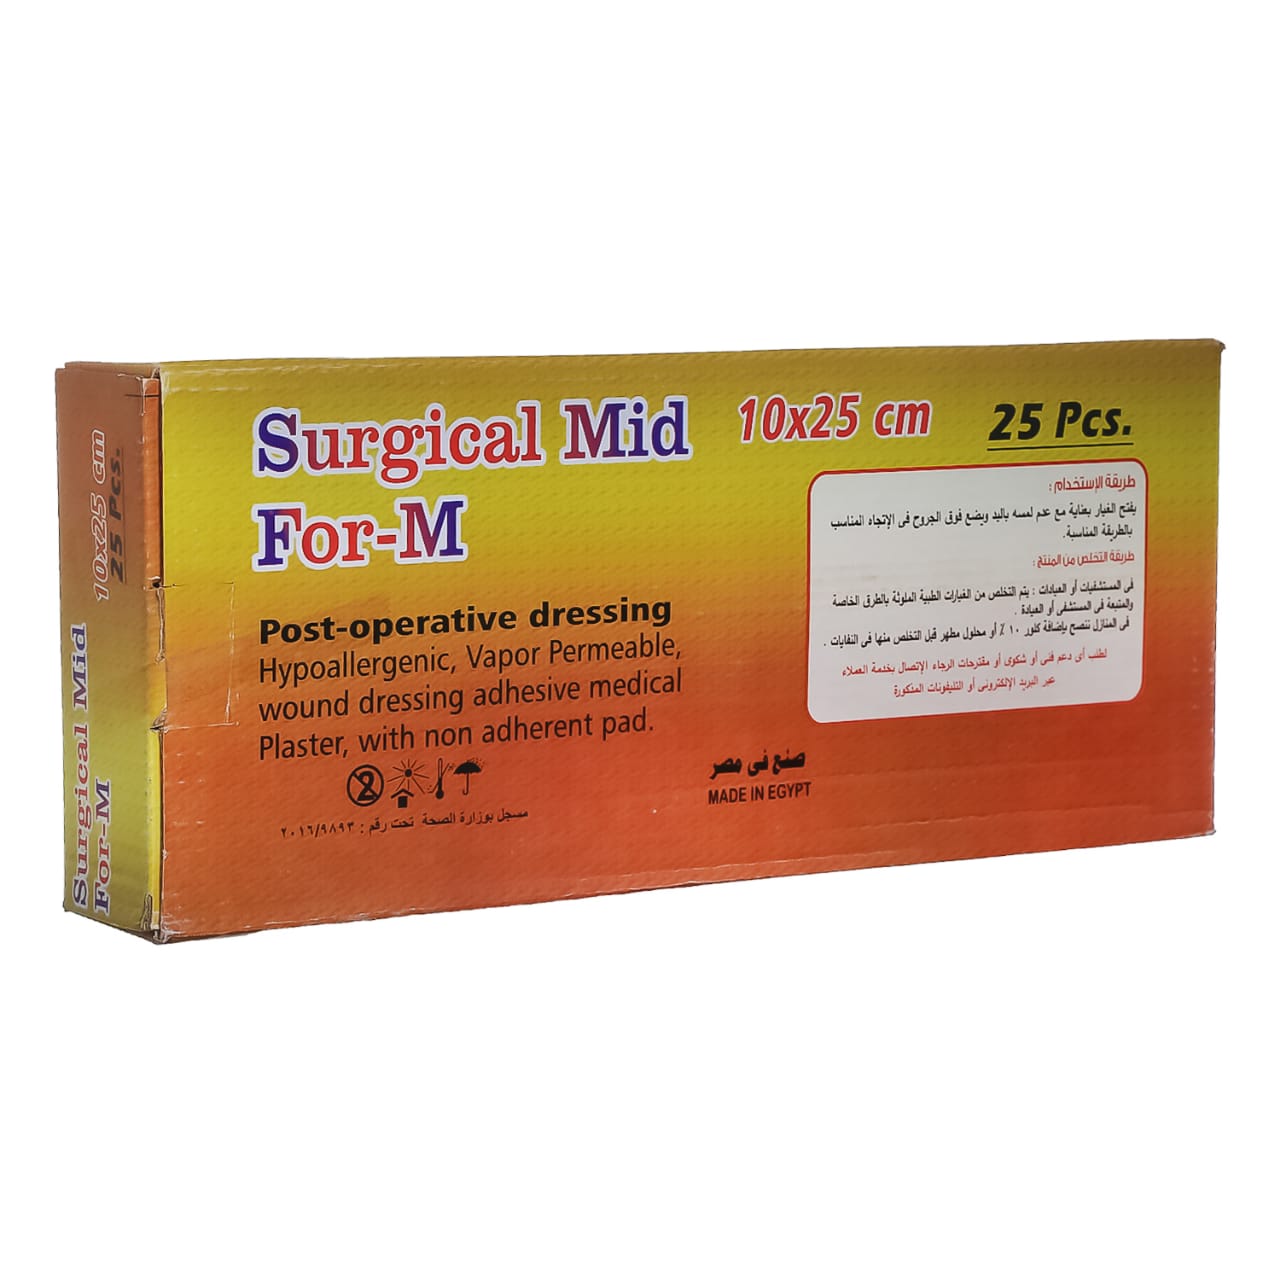 Surgical Mid For-M 10*25 cm